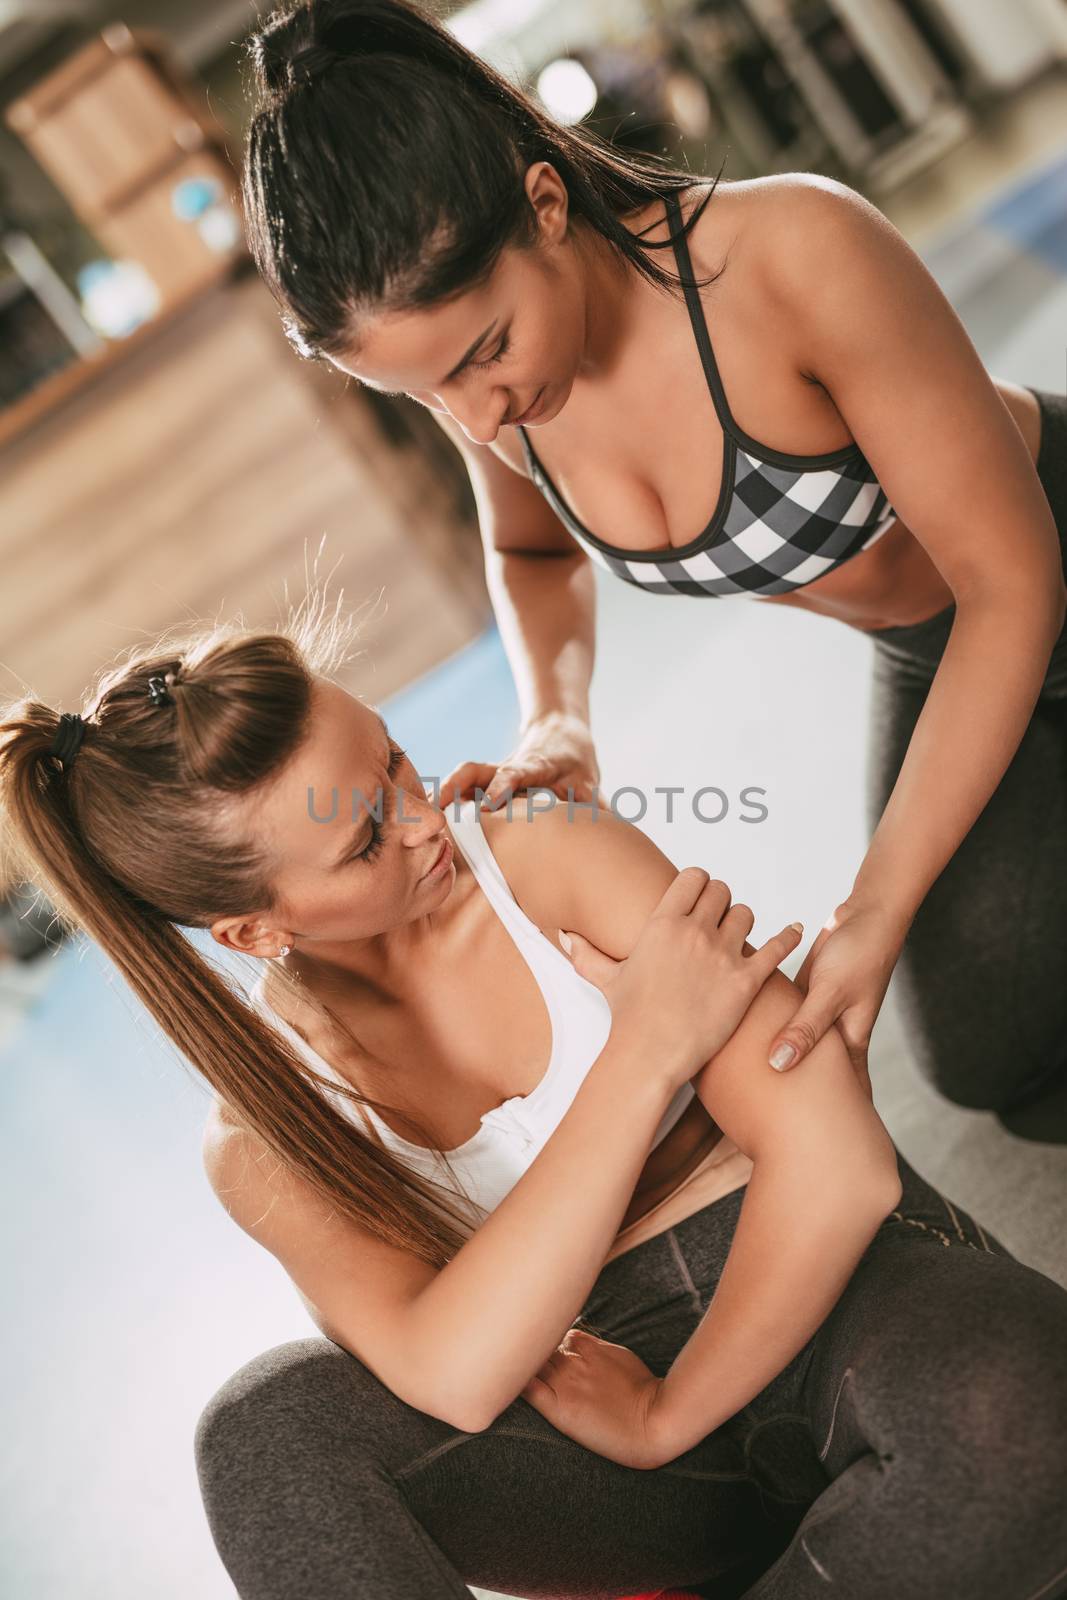 Female fitness instructor assisting young woman who had injured herself at the gym.